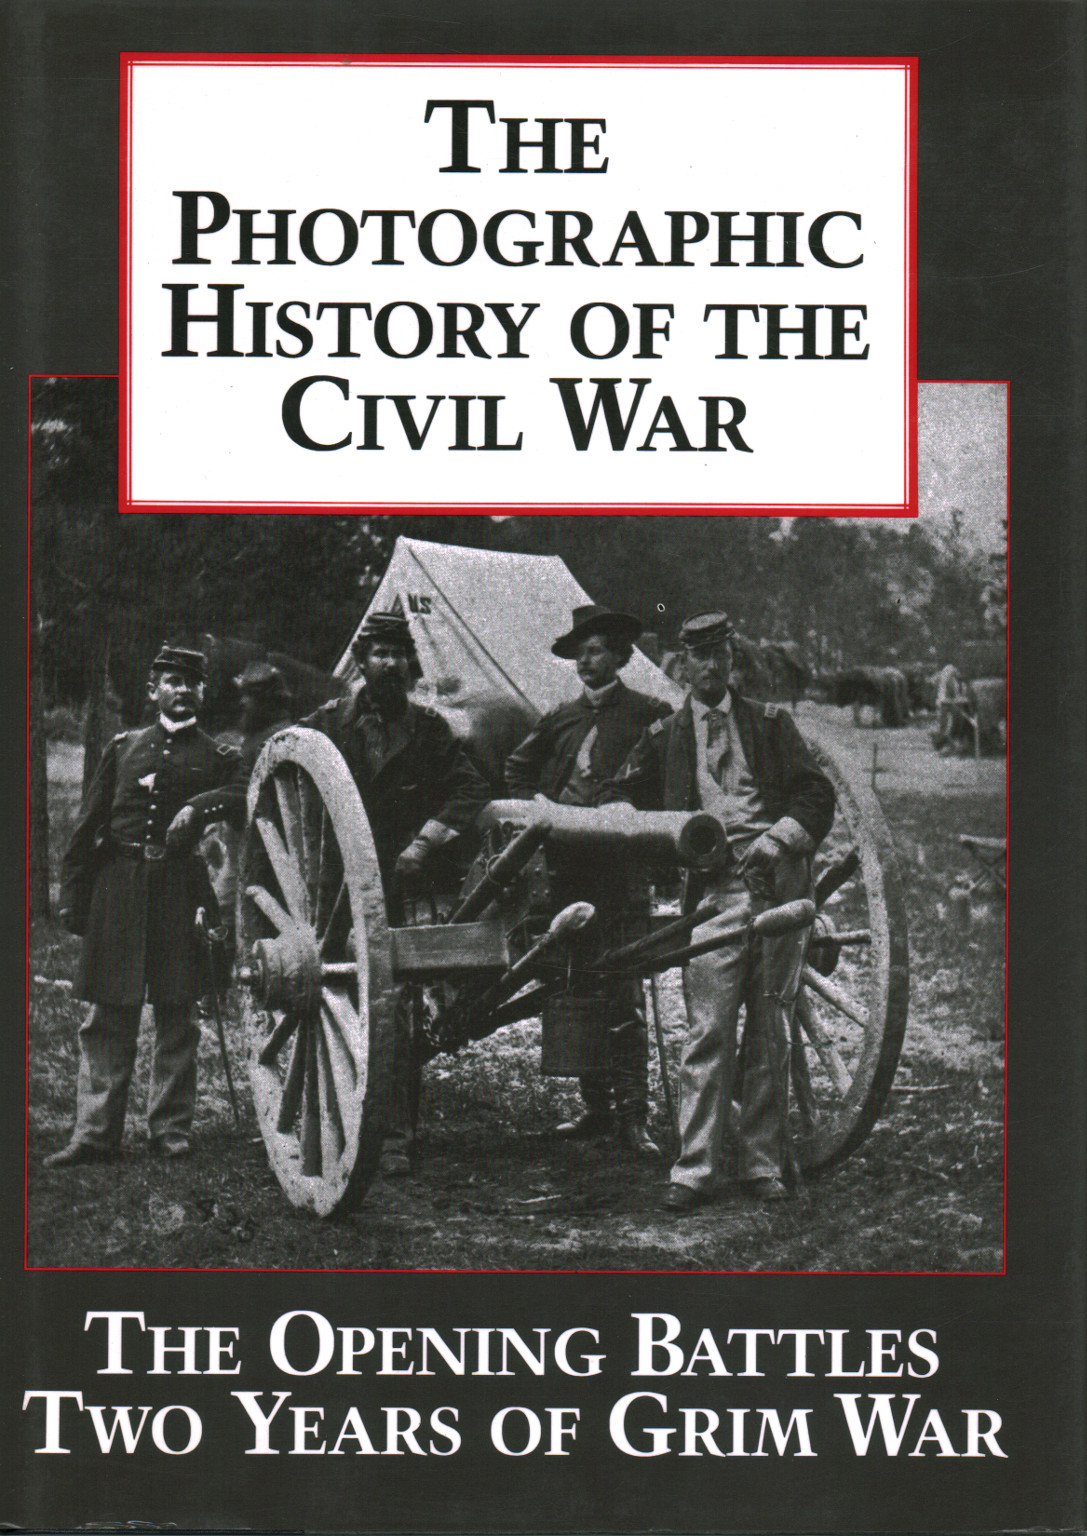 The Photographic History of the Civil War. Vol. 1, s.zu.